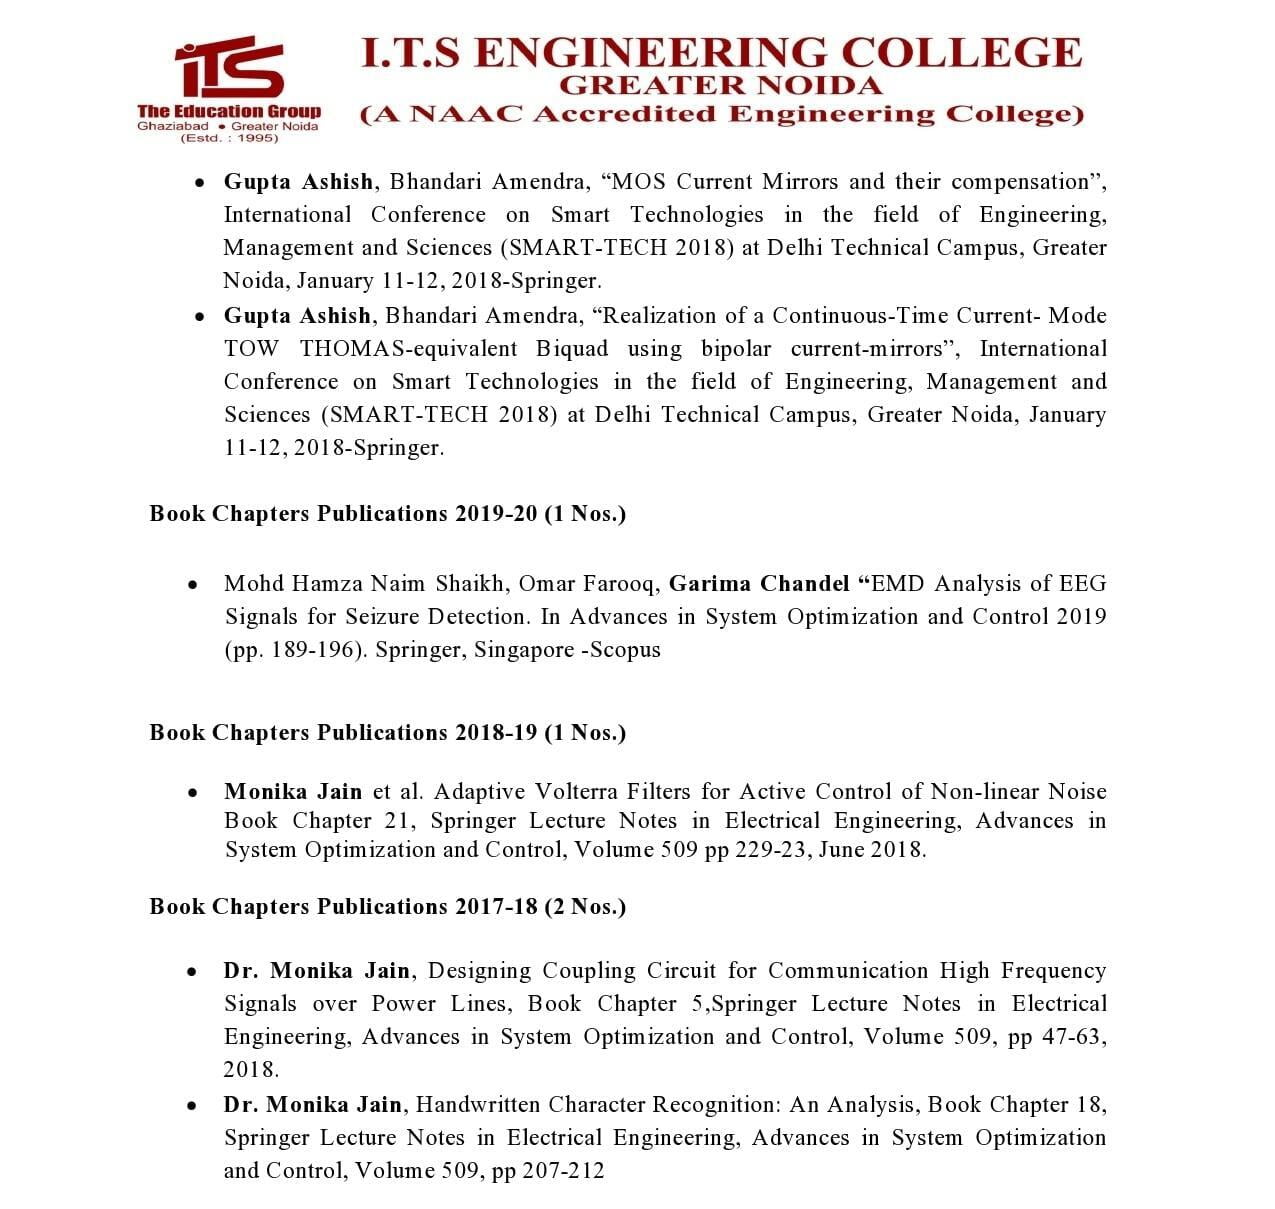 Research Papers List Electronics & Communication Engineering